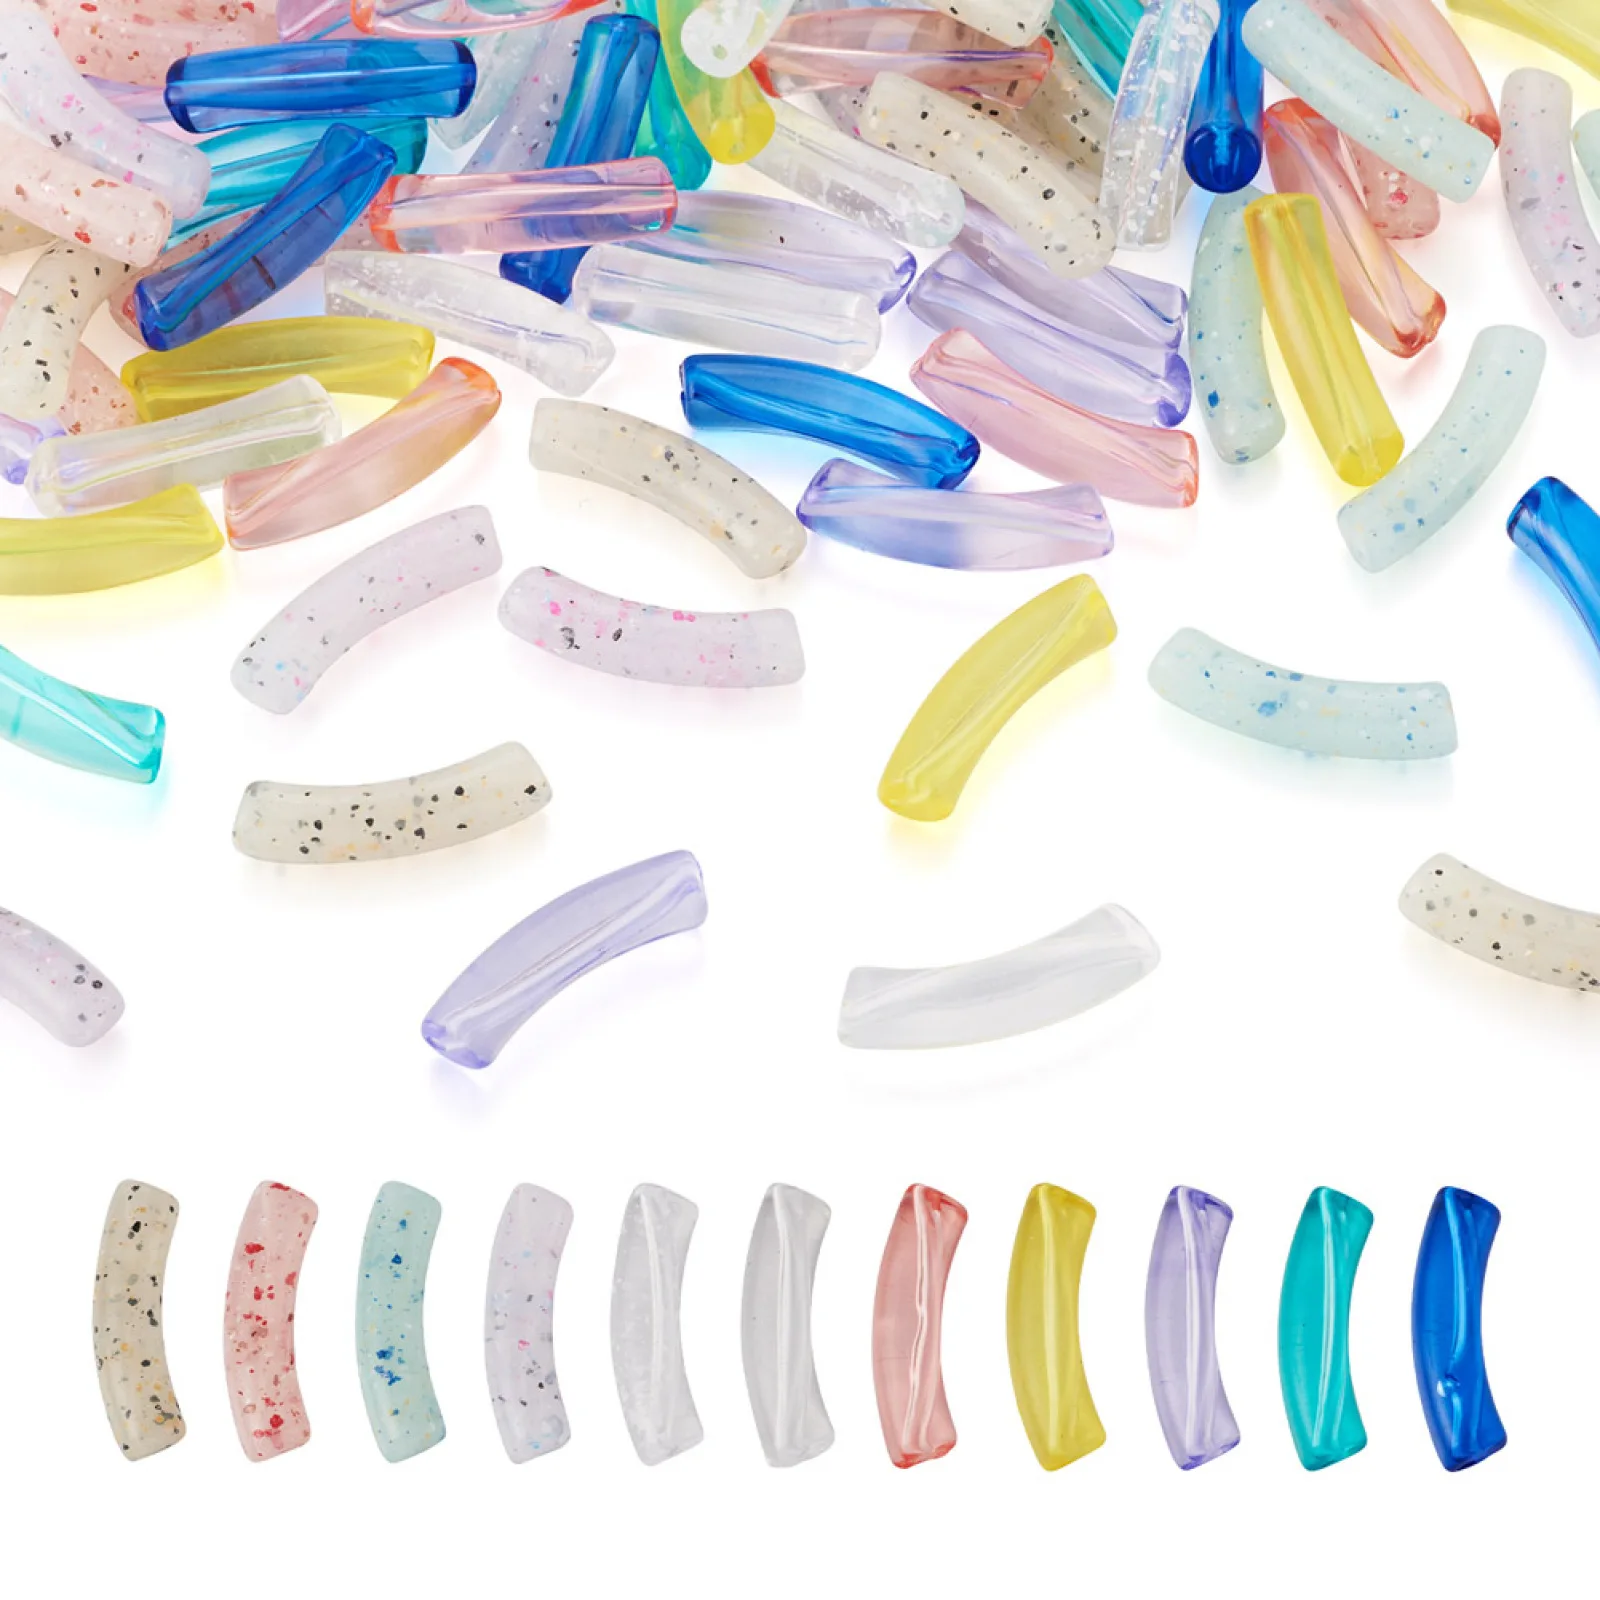 

110Pcs Colorful Transparent Acrylic Curved Tube Beads Loose Spacer Beads for DIY Bangle Bracelet Summer Fashion Jewelry Making